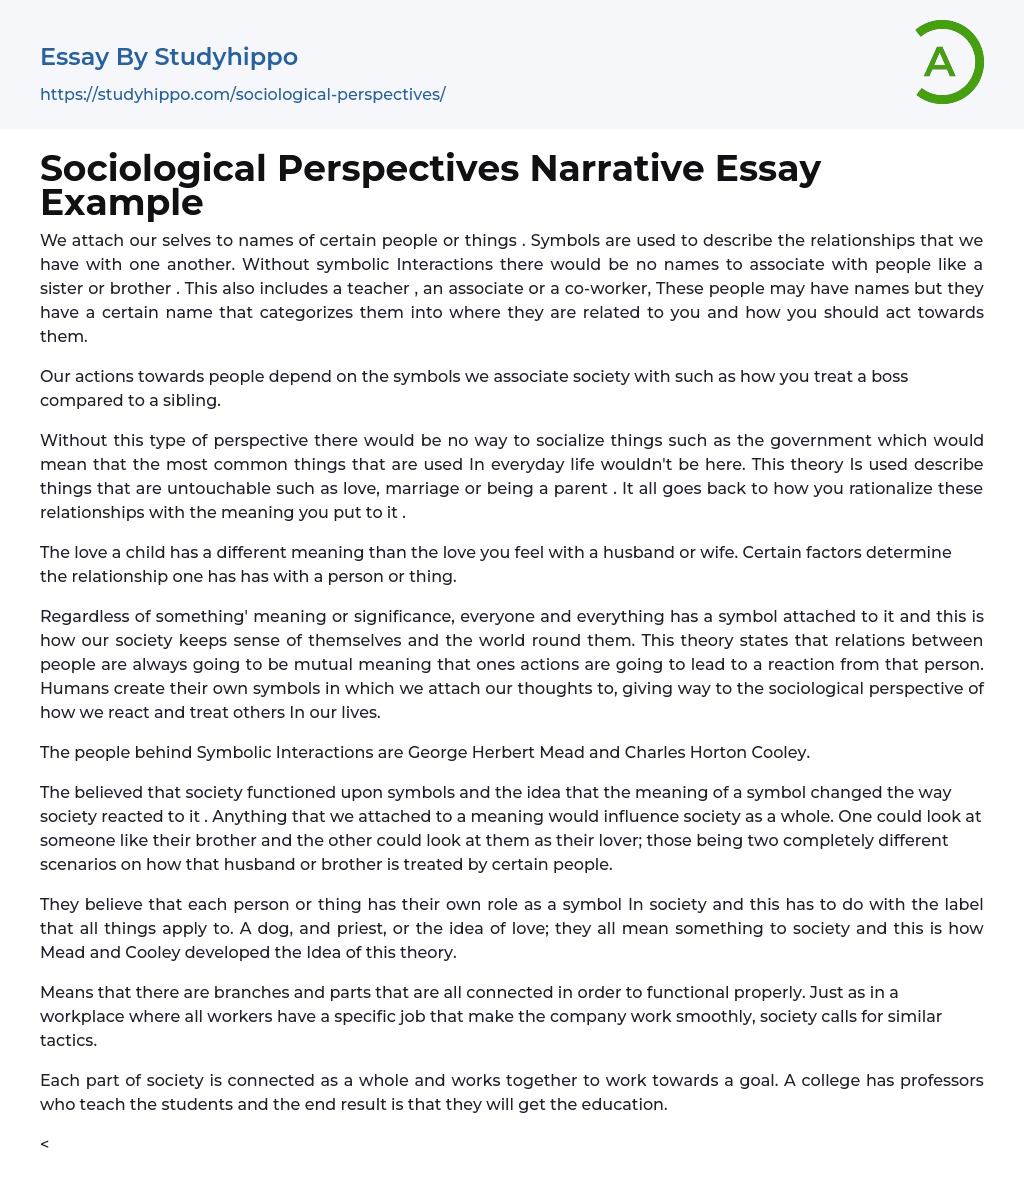 Sociological Perspectives Narrative Essay Example